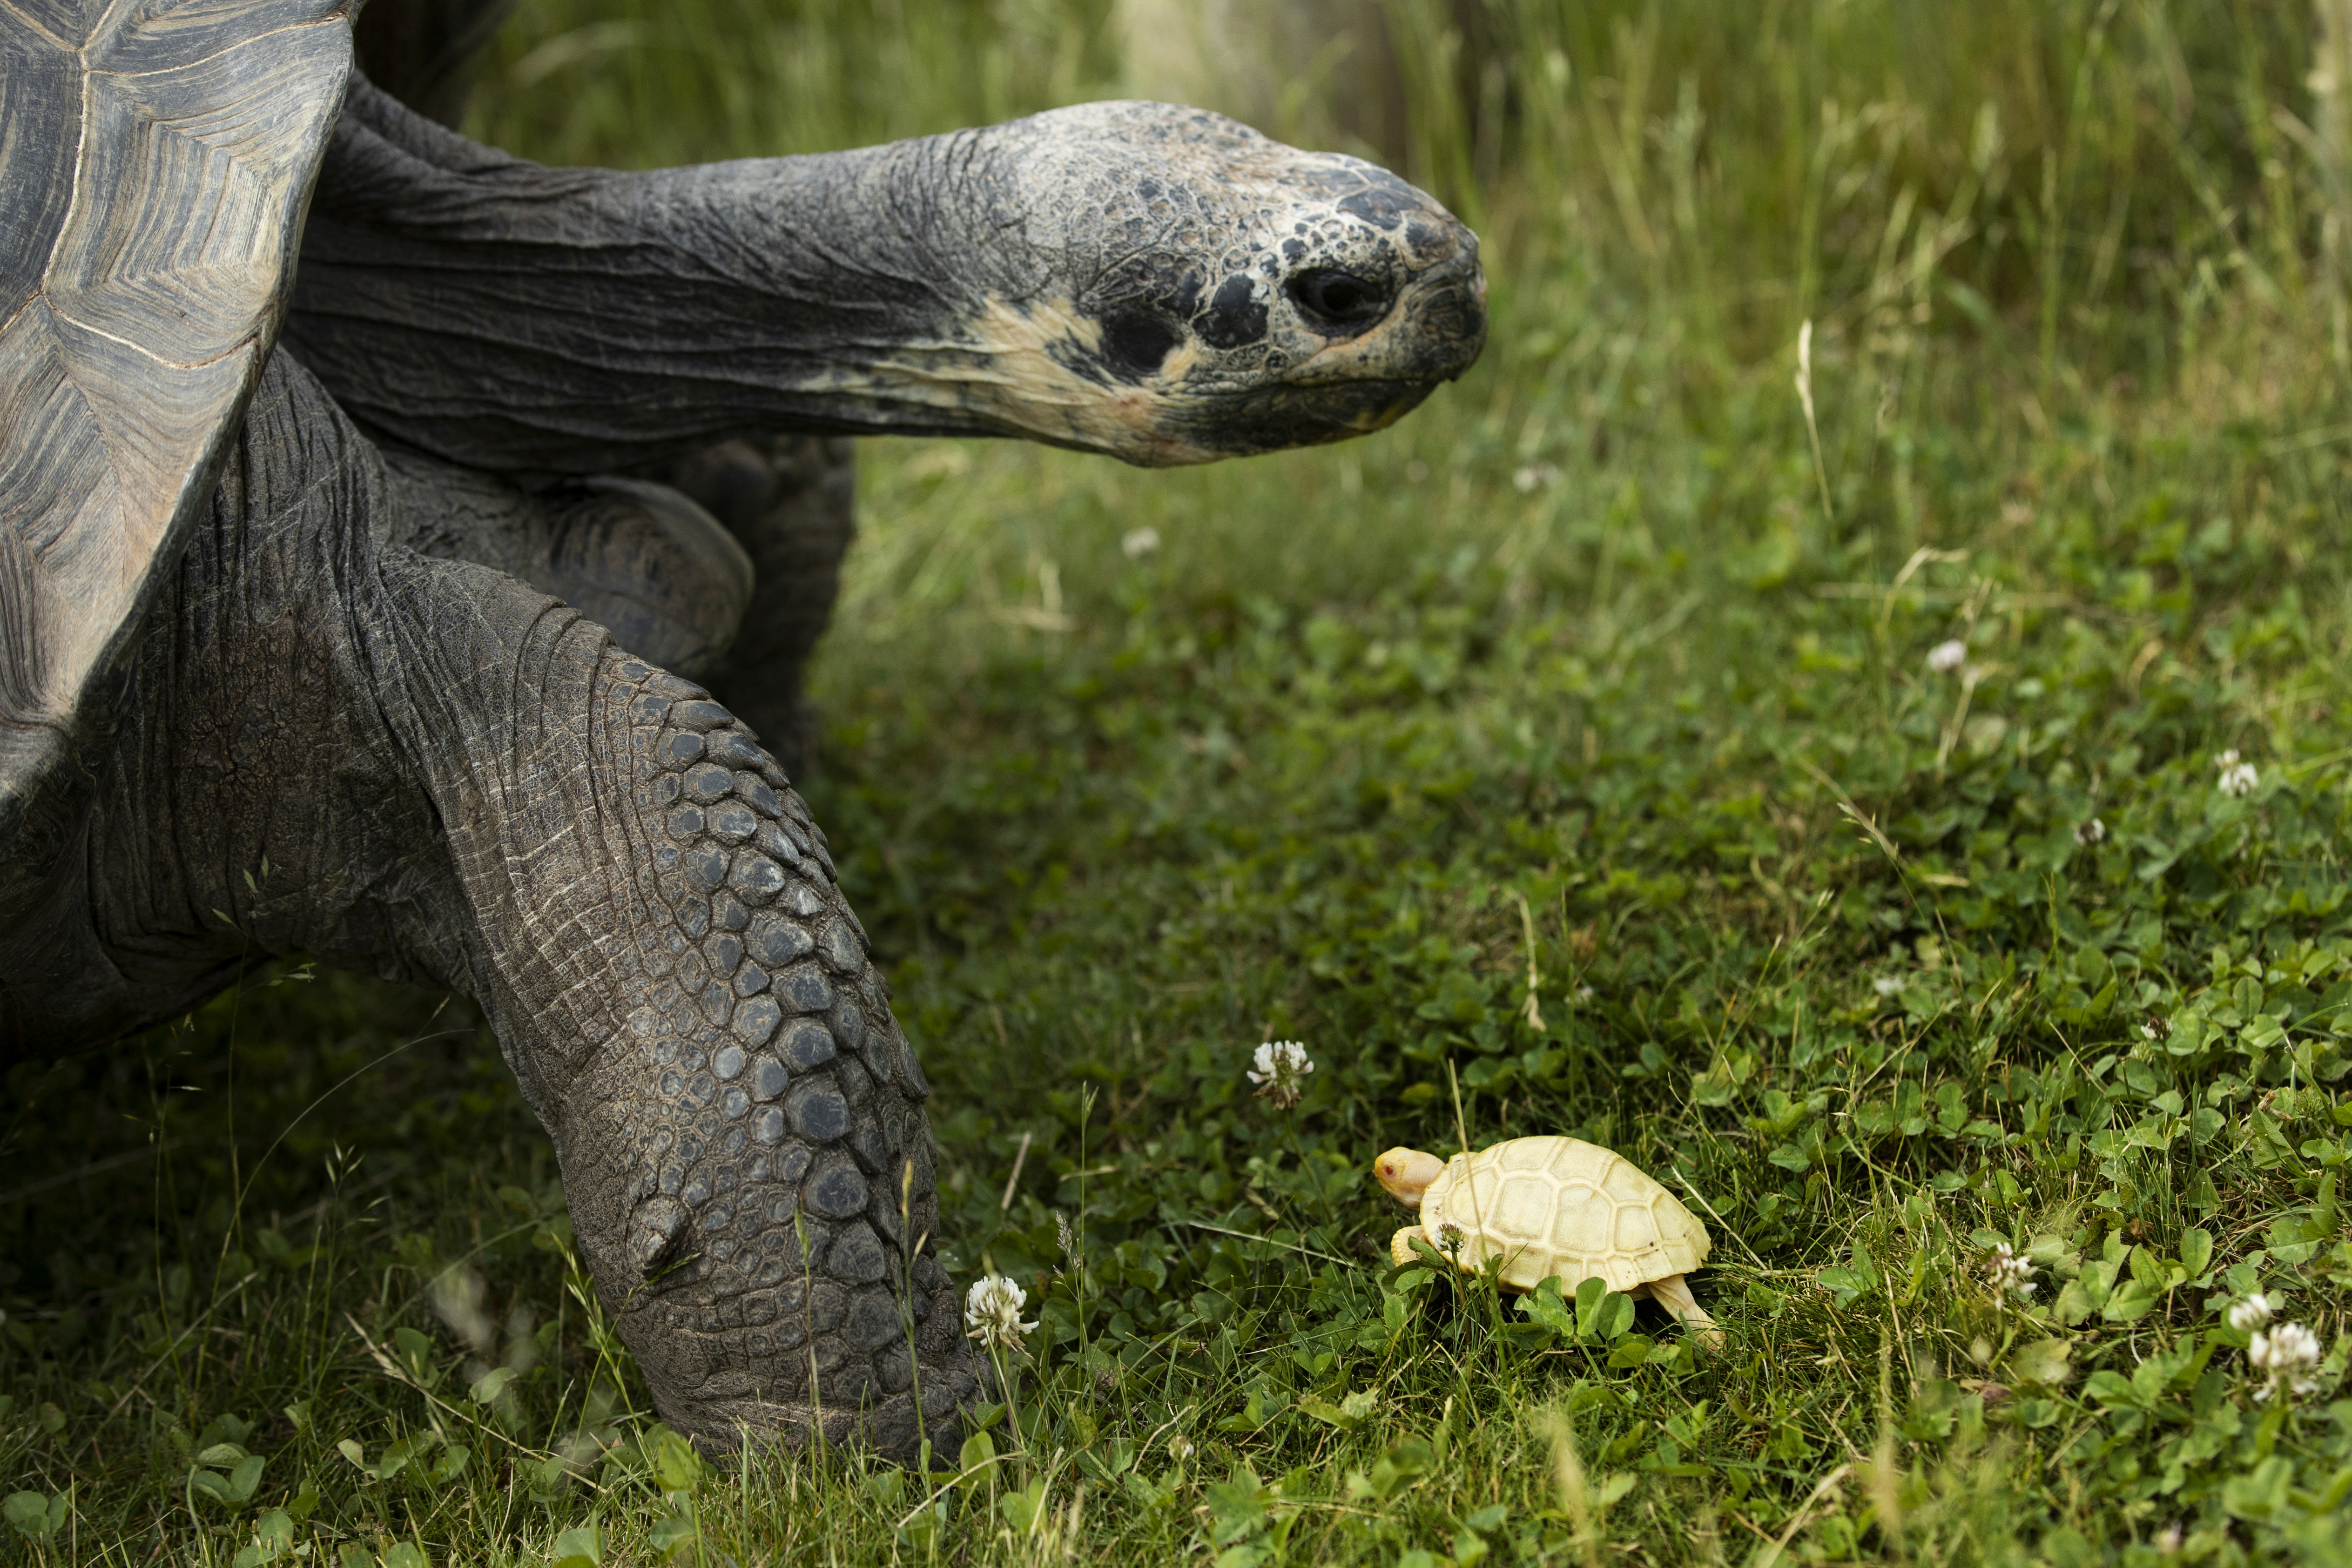 An albino baby Galapagos tortoise, born on May 1 and the first ever recorded albino birth, walks past an adult tortoise in Servion